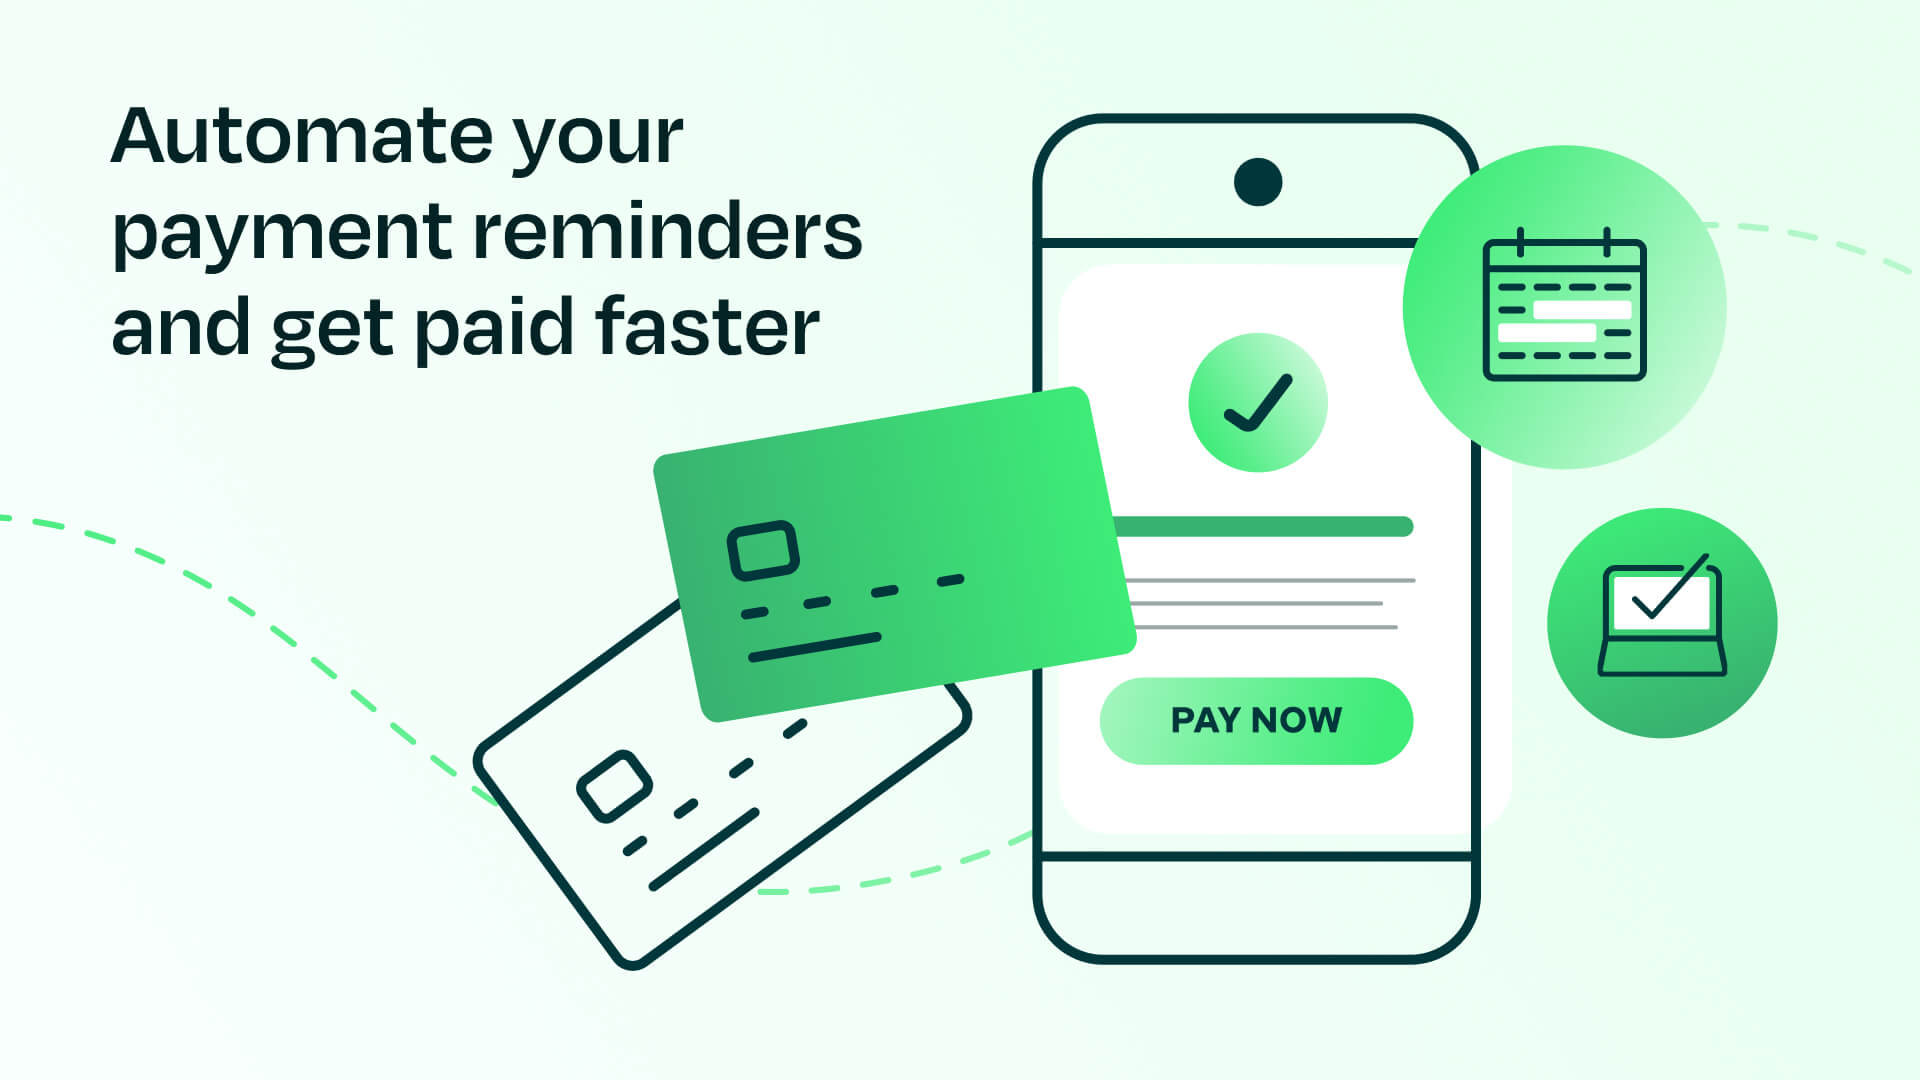 Automate your payment reminders to get paid faster illustration